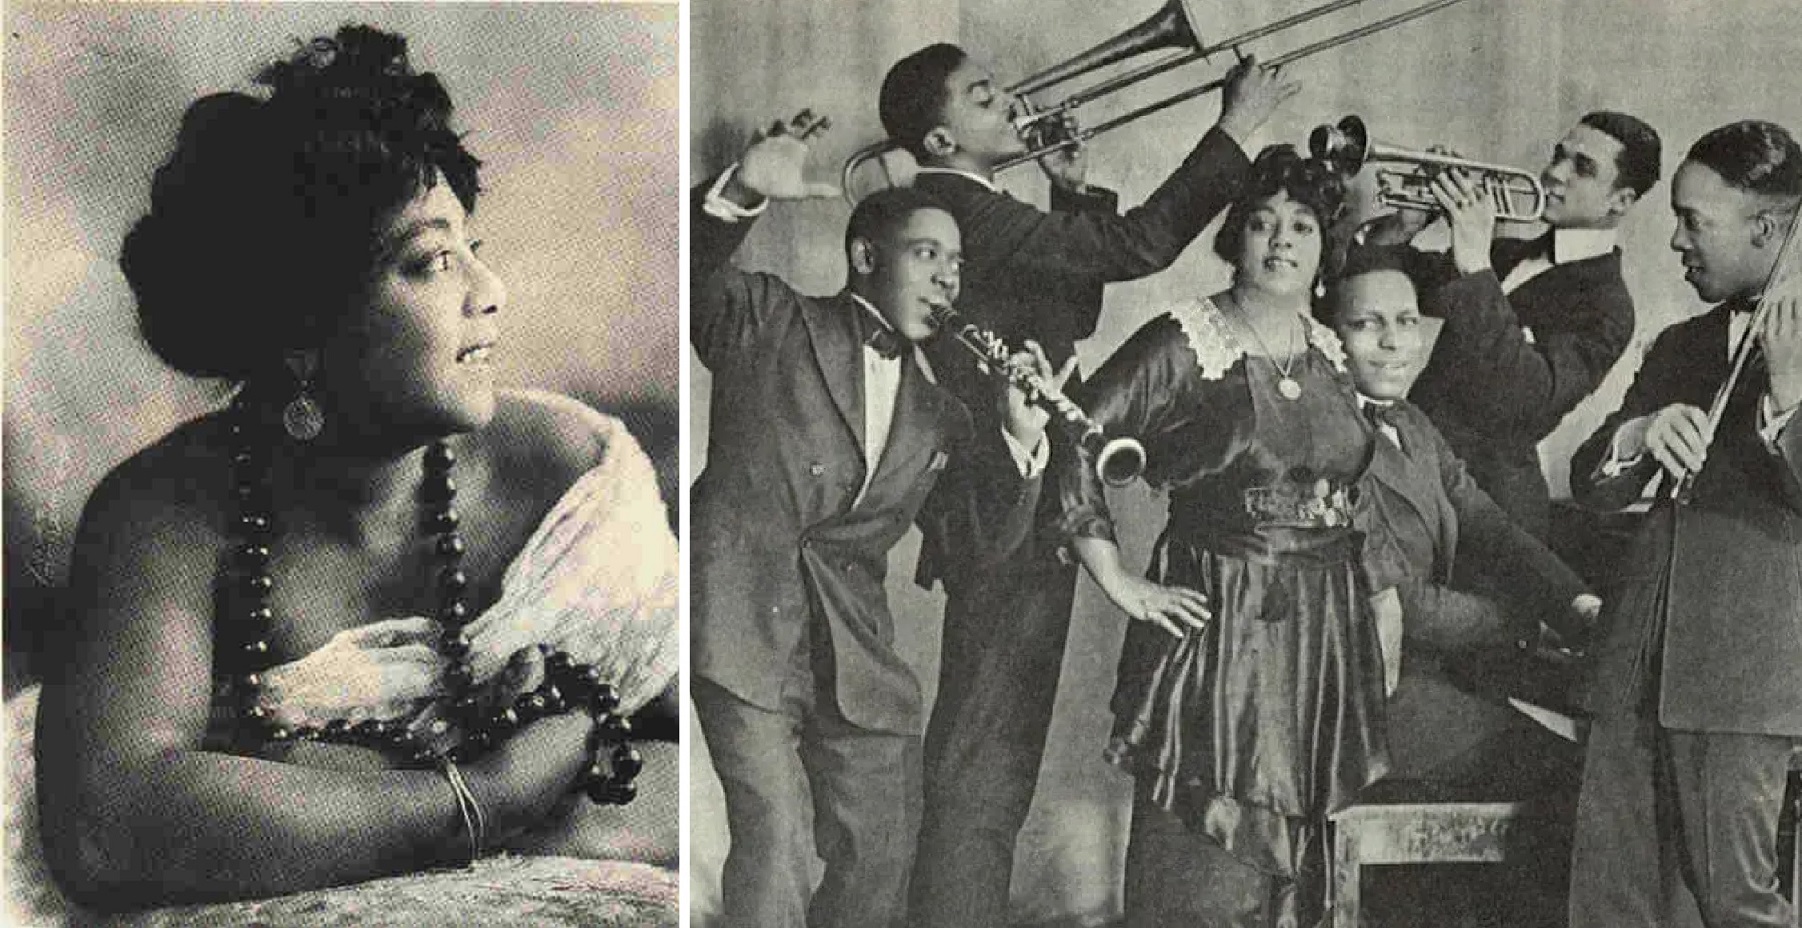 Mamie Smith – The First African-American Female to Make a Vocal Blues Recording in 1920